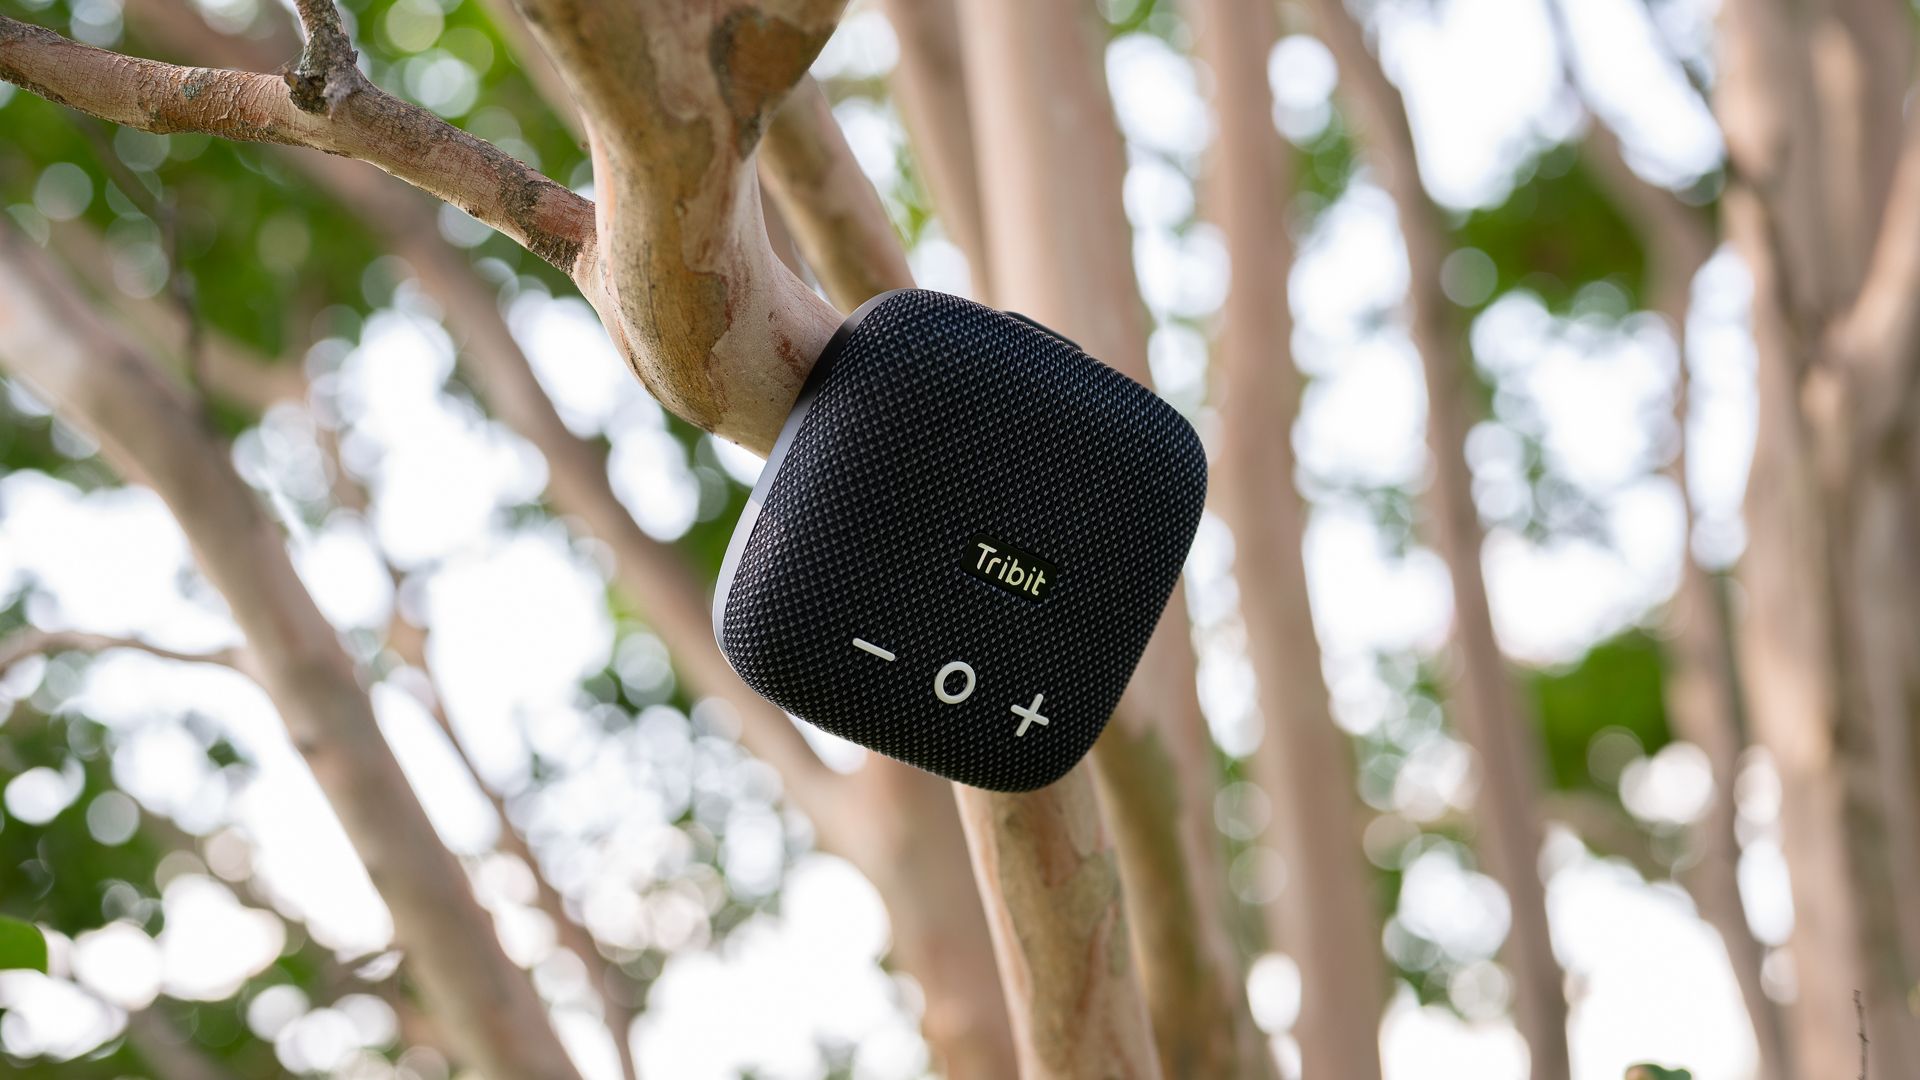 Tribit speaker attached to a tree